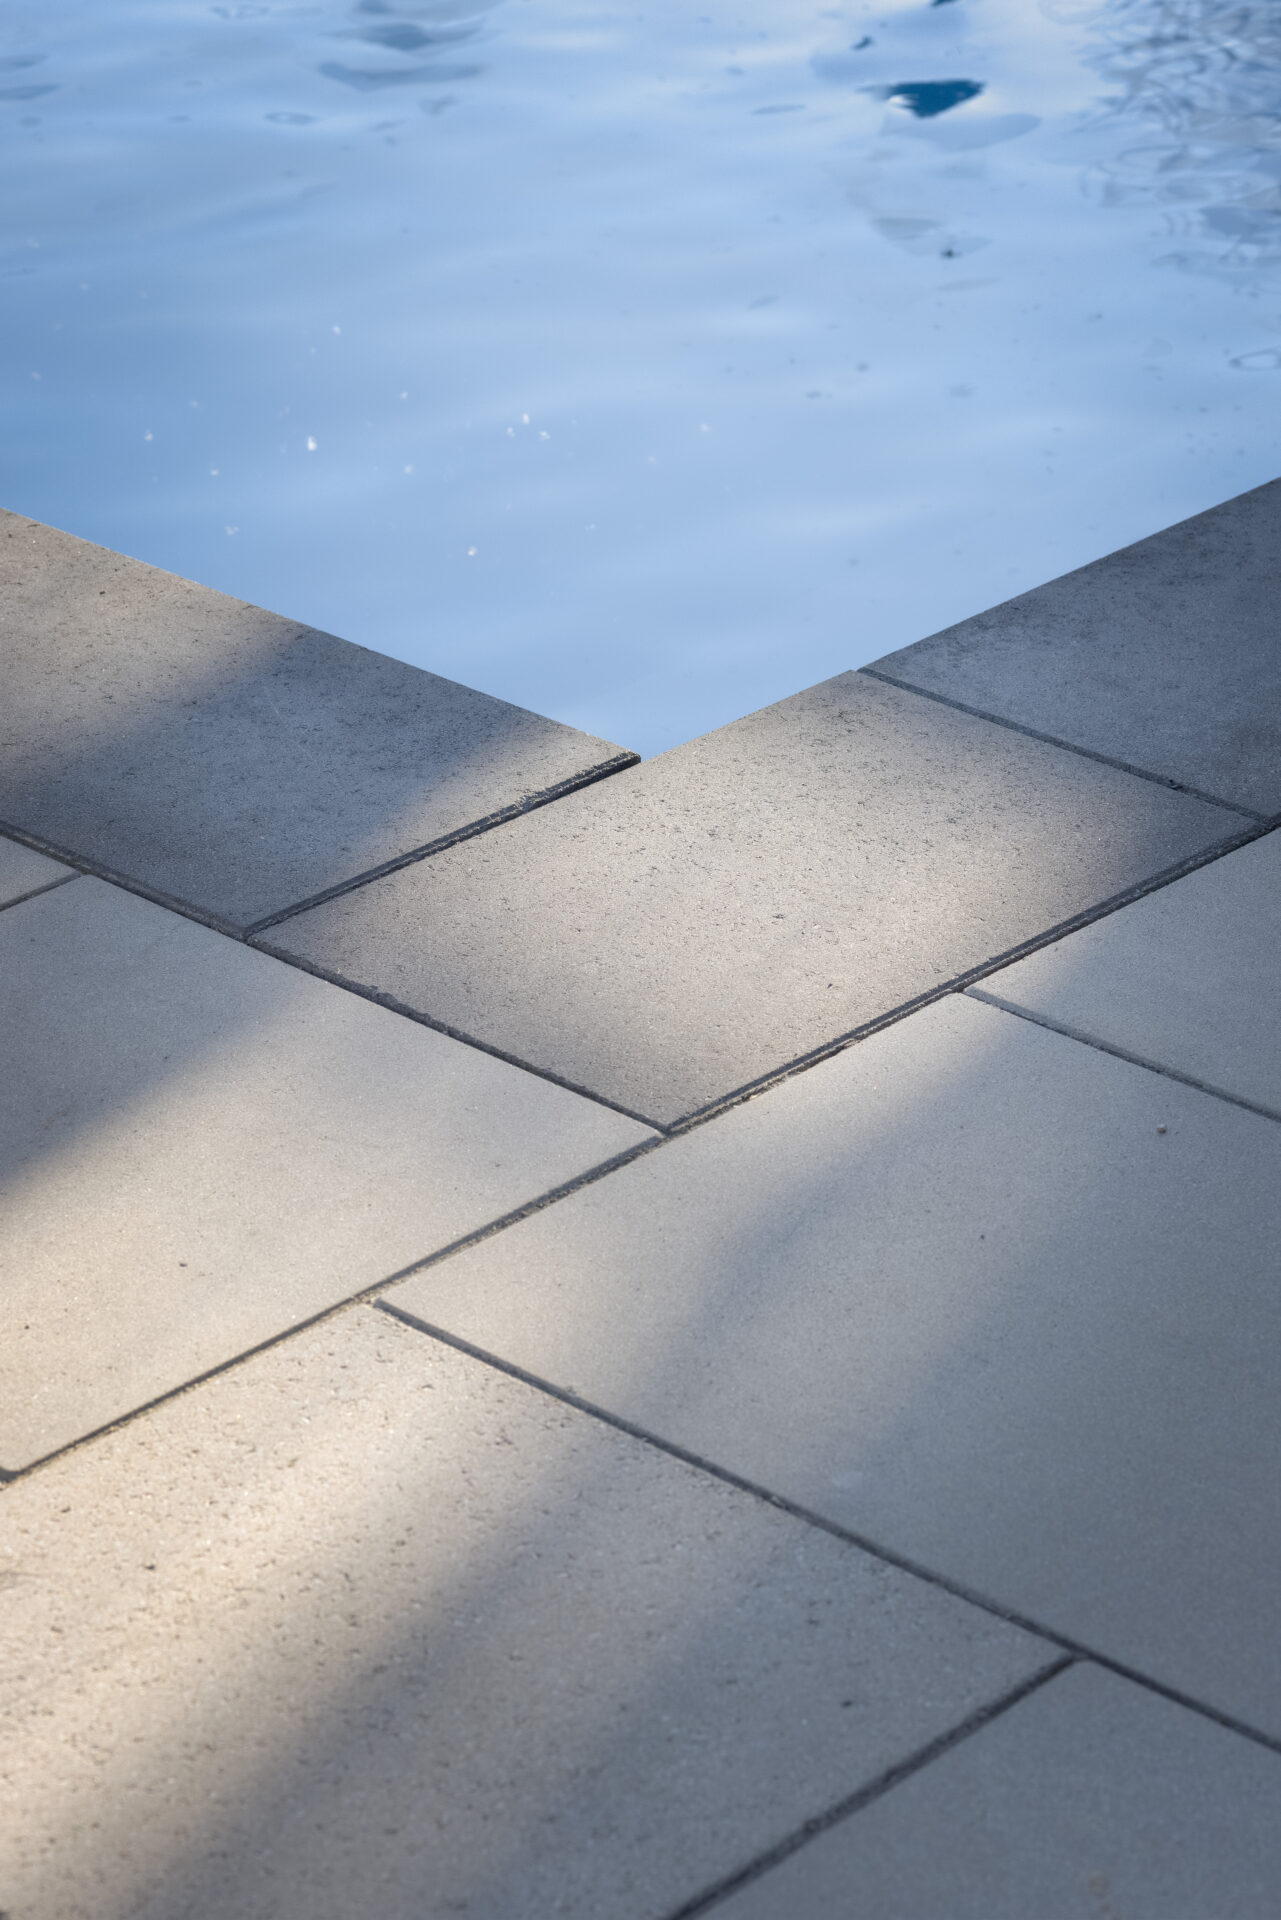 This image shows a pool edge with geometric paving stones leading up to tranquil blue water reflecting sunlight, creating a serene outdoor scene.